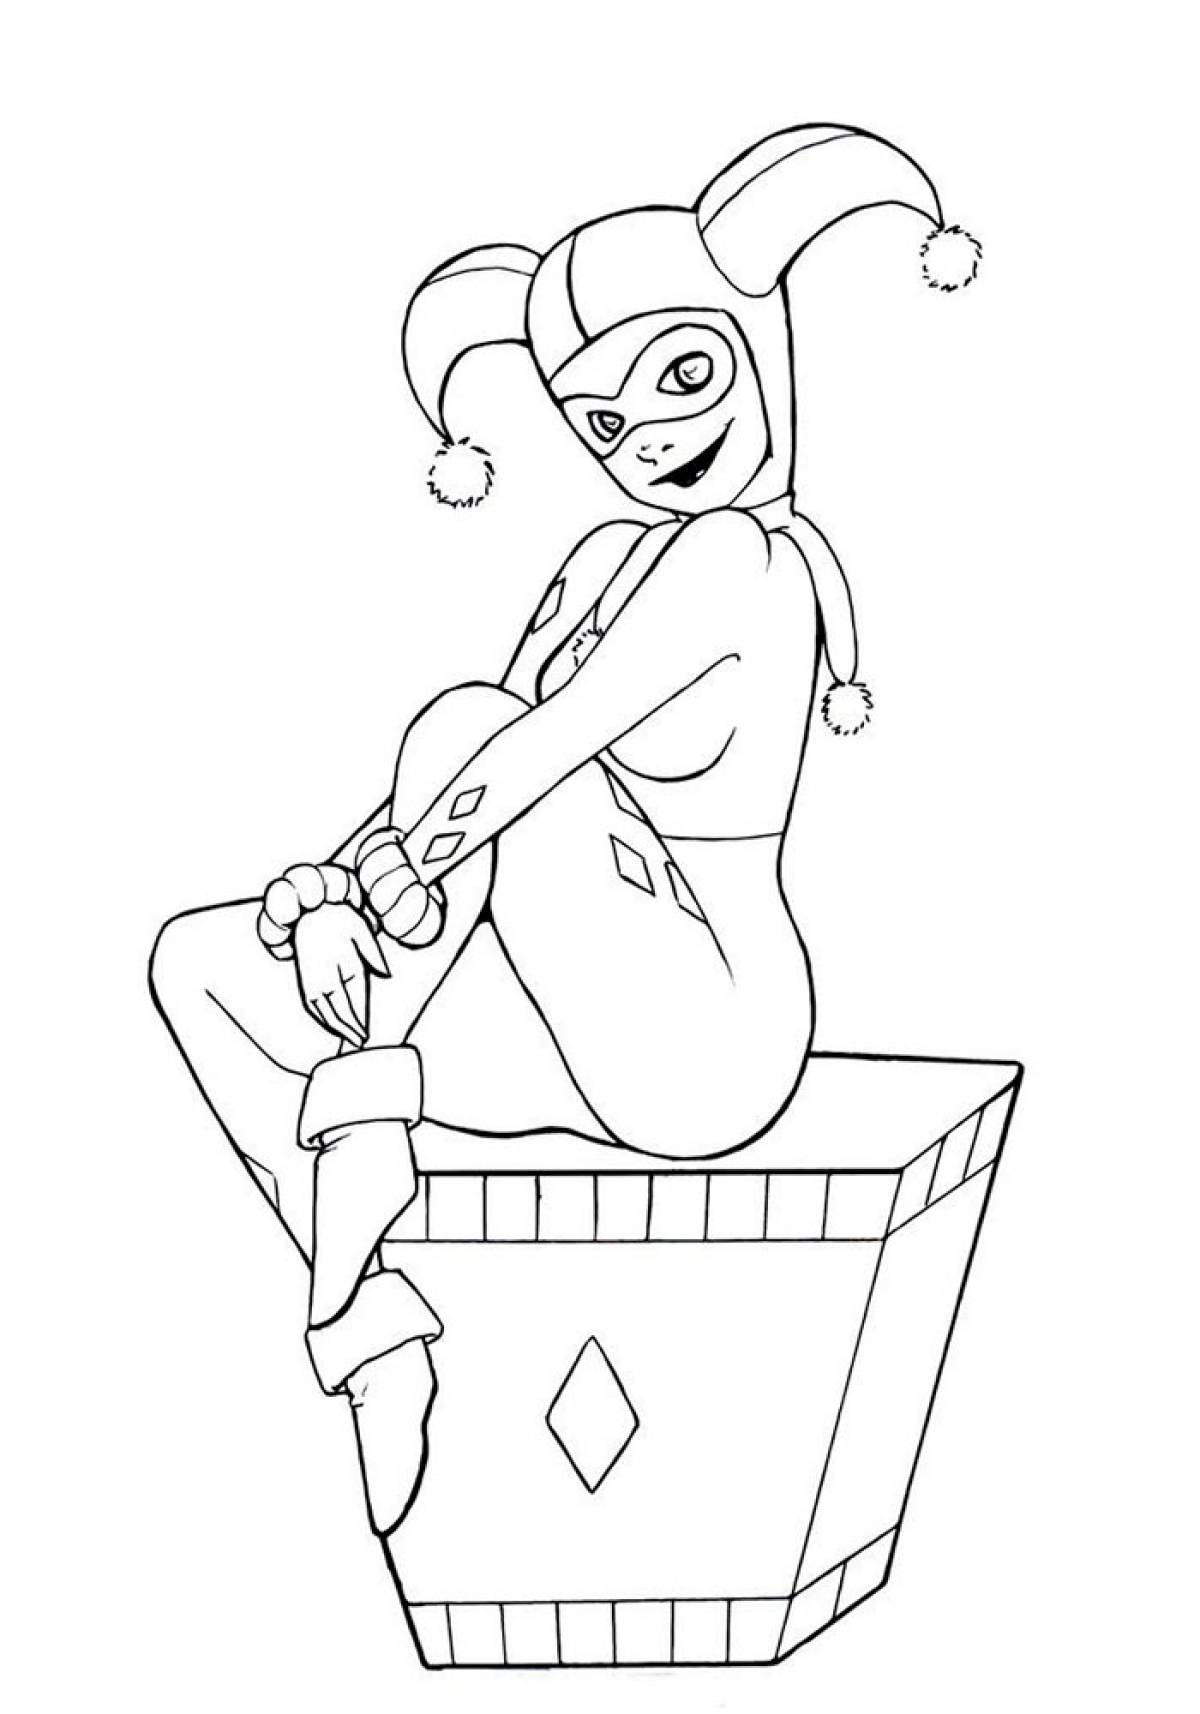 Harley quinn picture